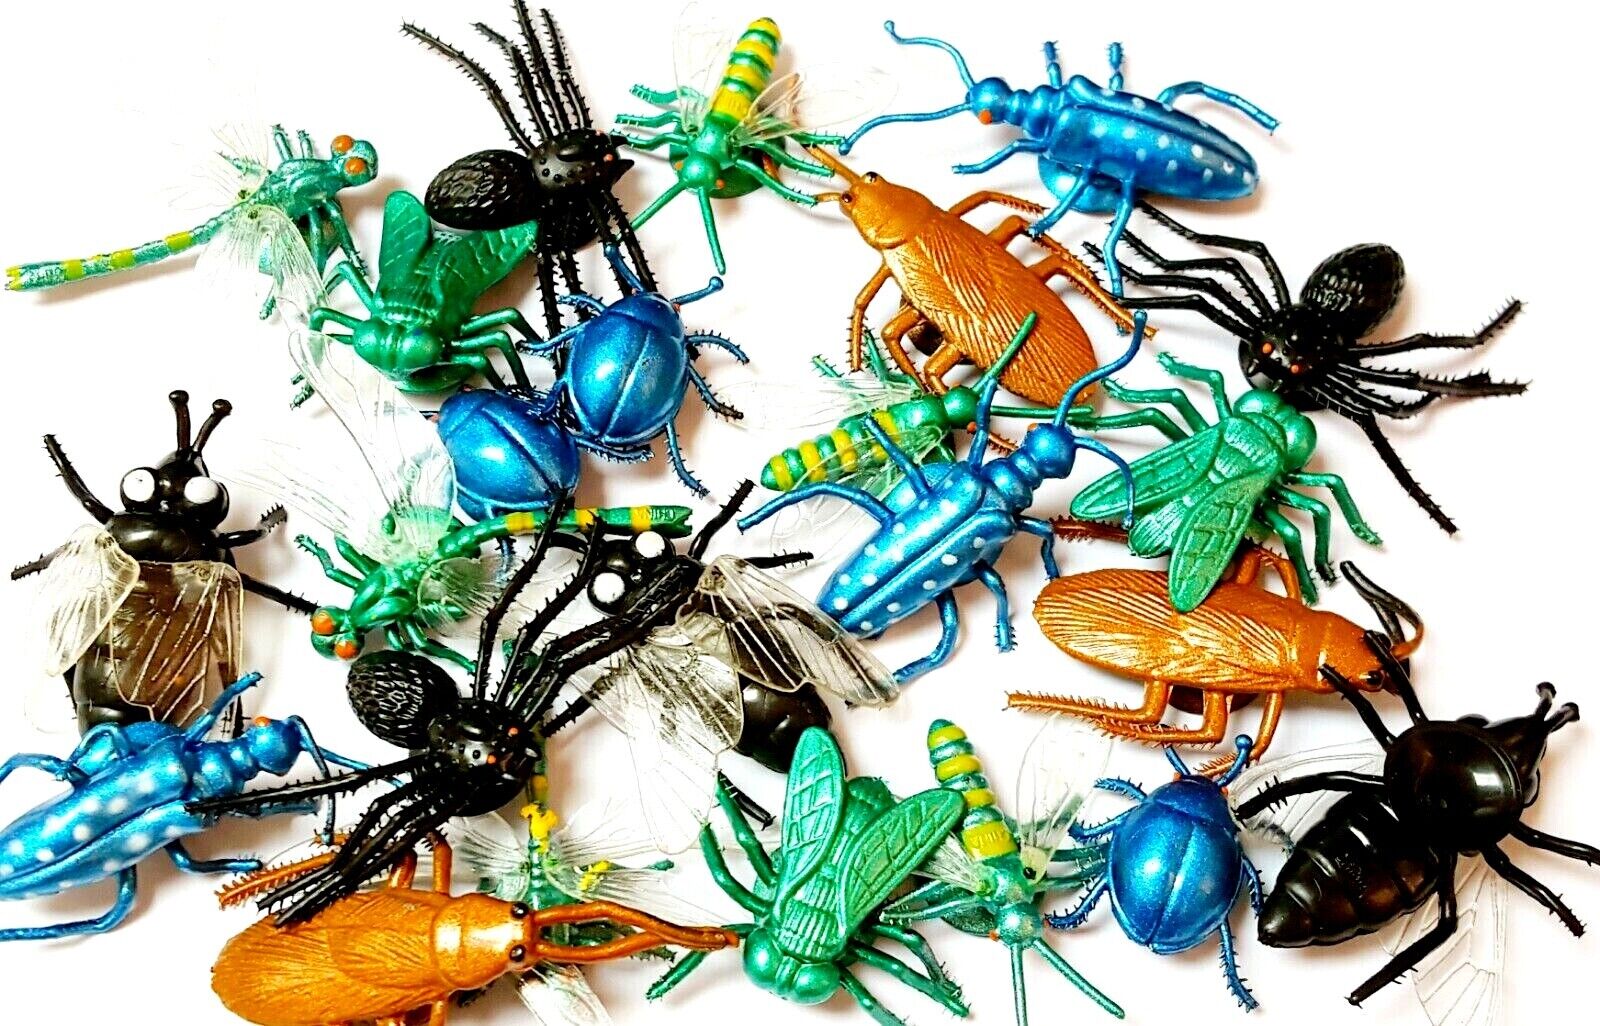 100pc Suction Fake Insect Fly Bug Spider Trick JOKE Fun Party Favor Decoration